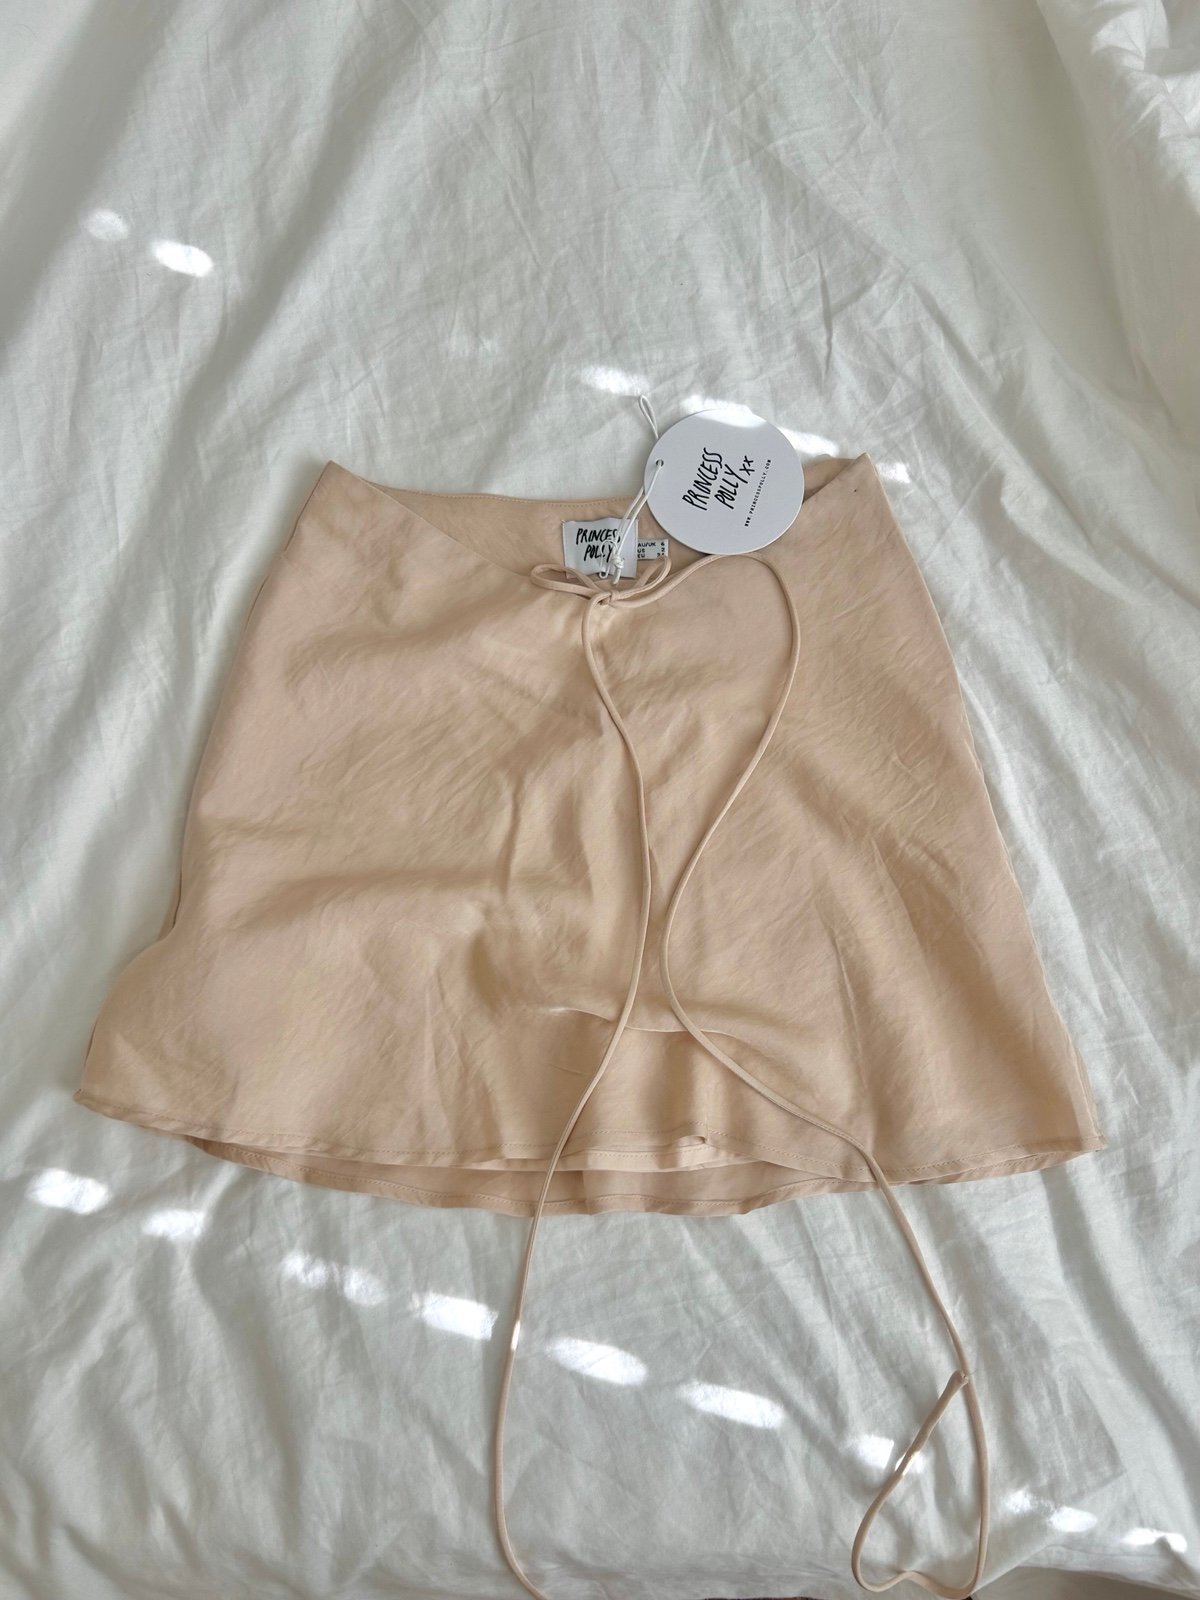 Special offer  princess polly mini skirt BRAND NEW WITH TAG K583ae0Us well sale